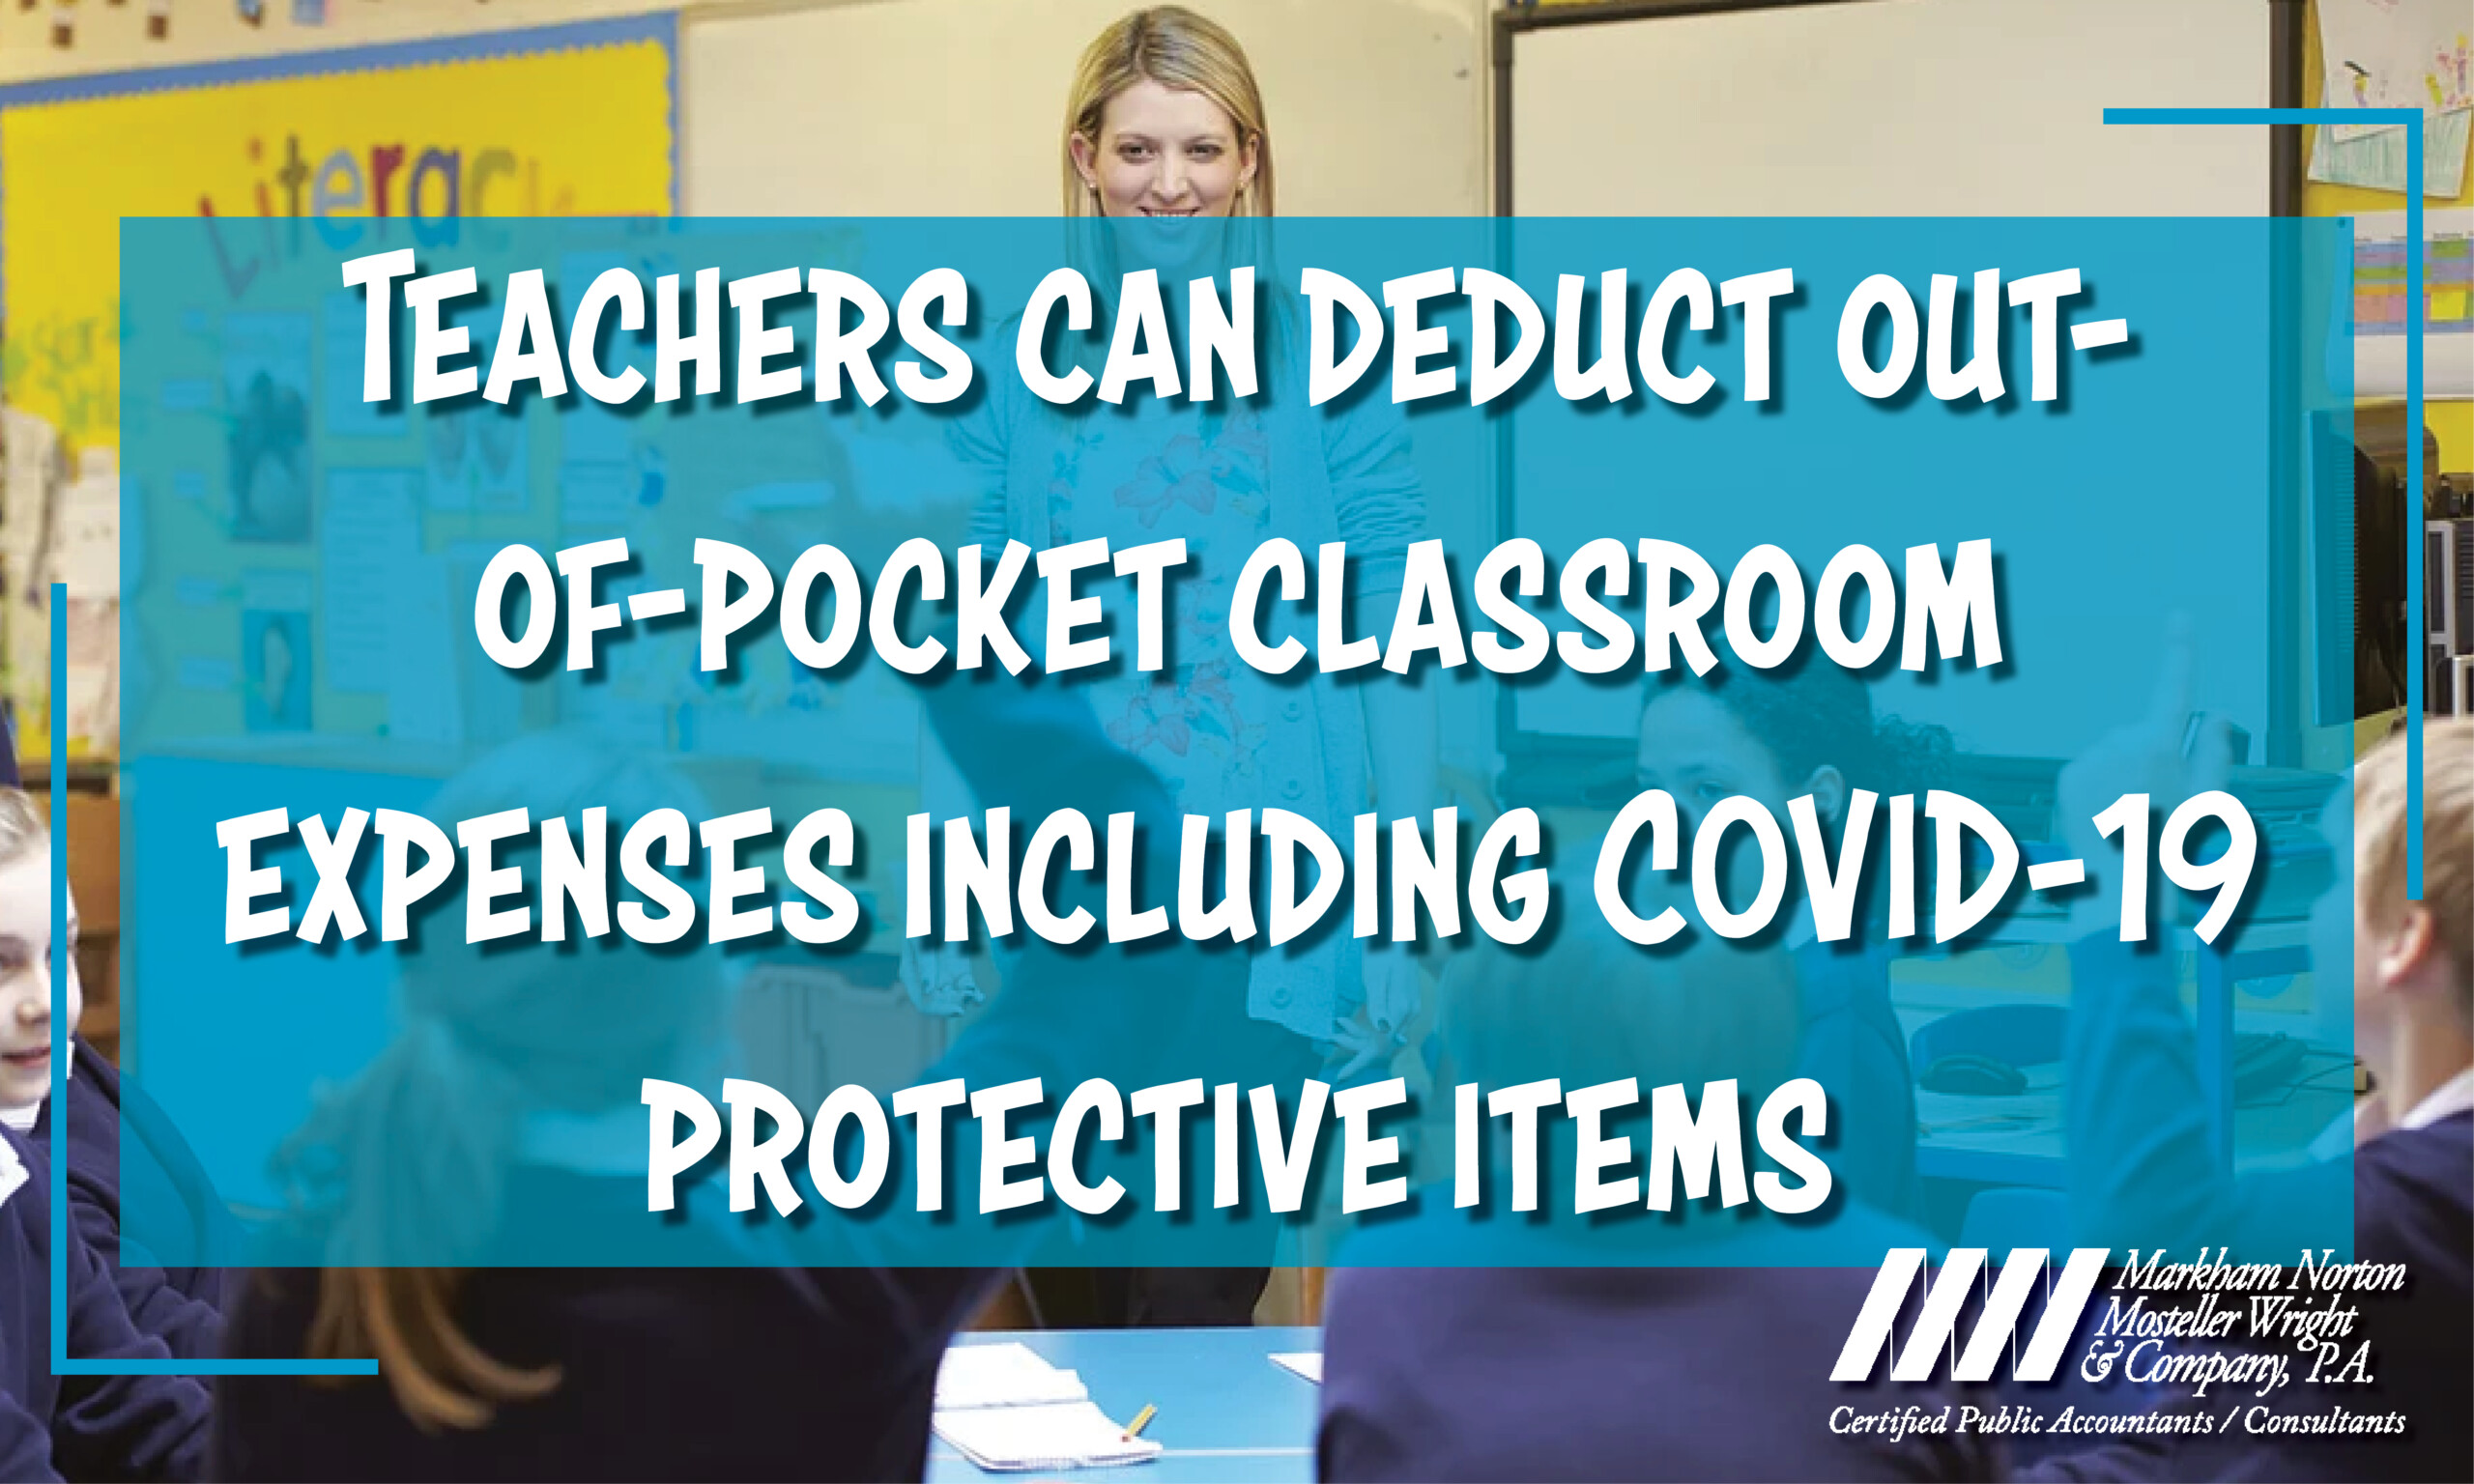 Teachers can deduct out-of-pocket classroom expenses